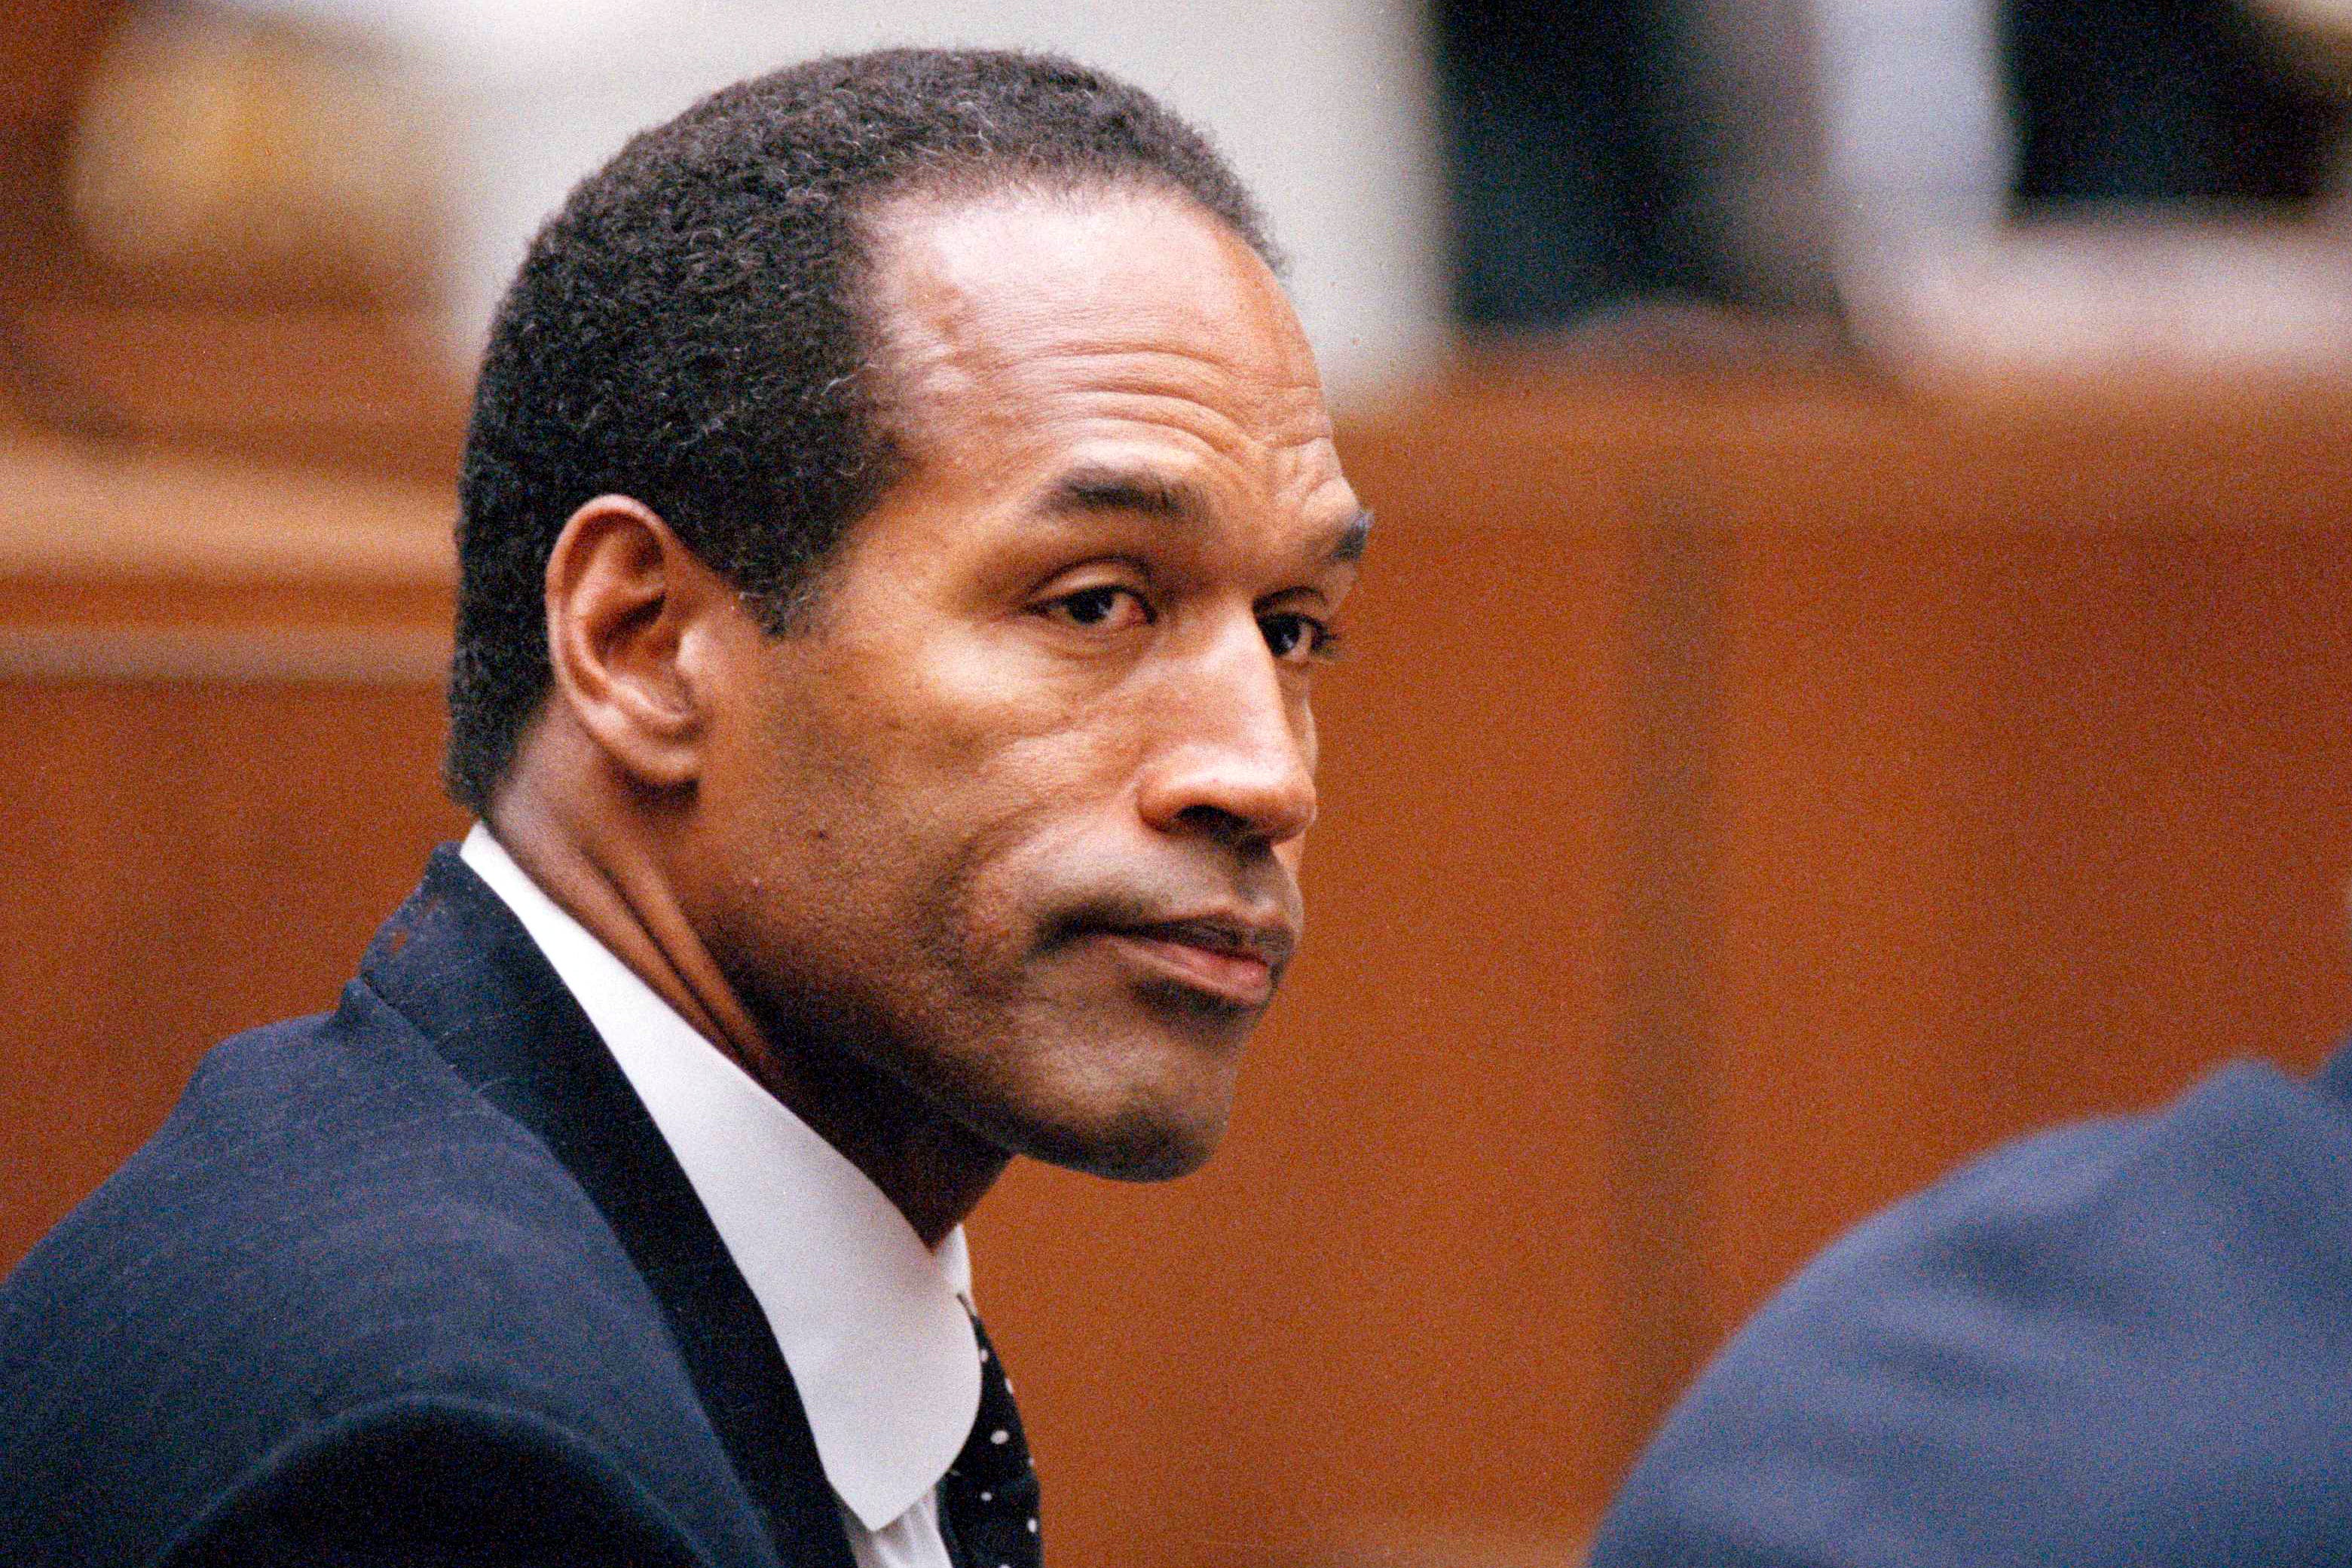 oj simpson’s official cause of death revealed